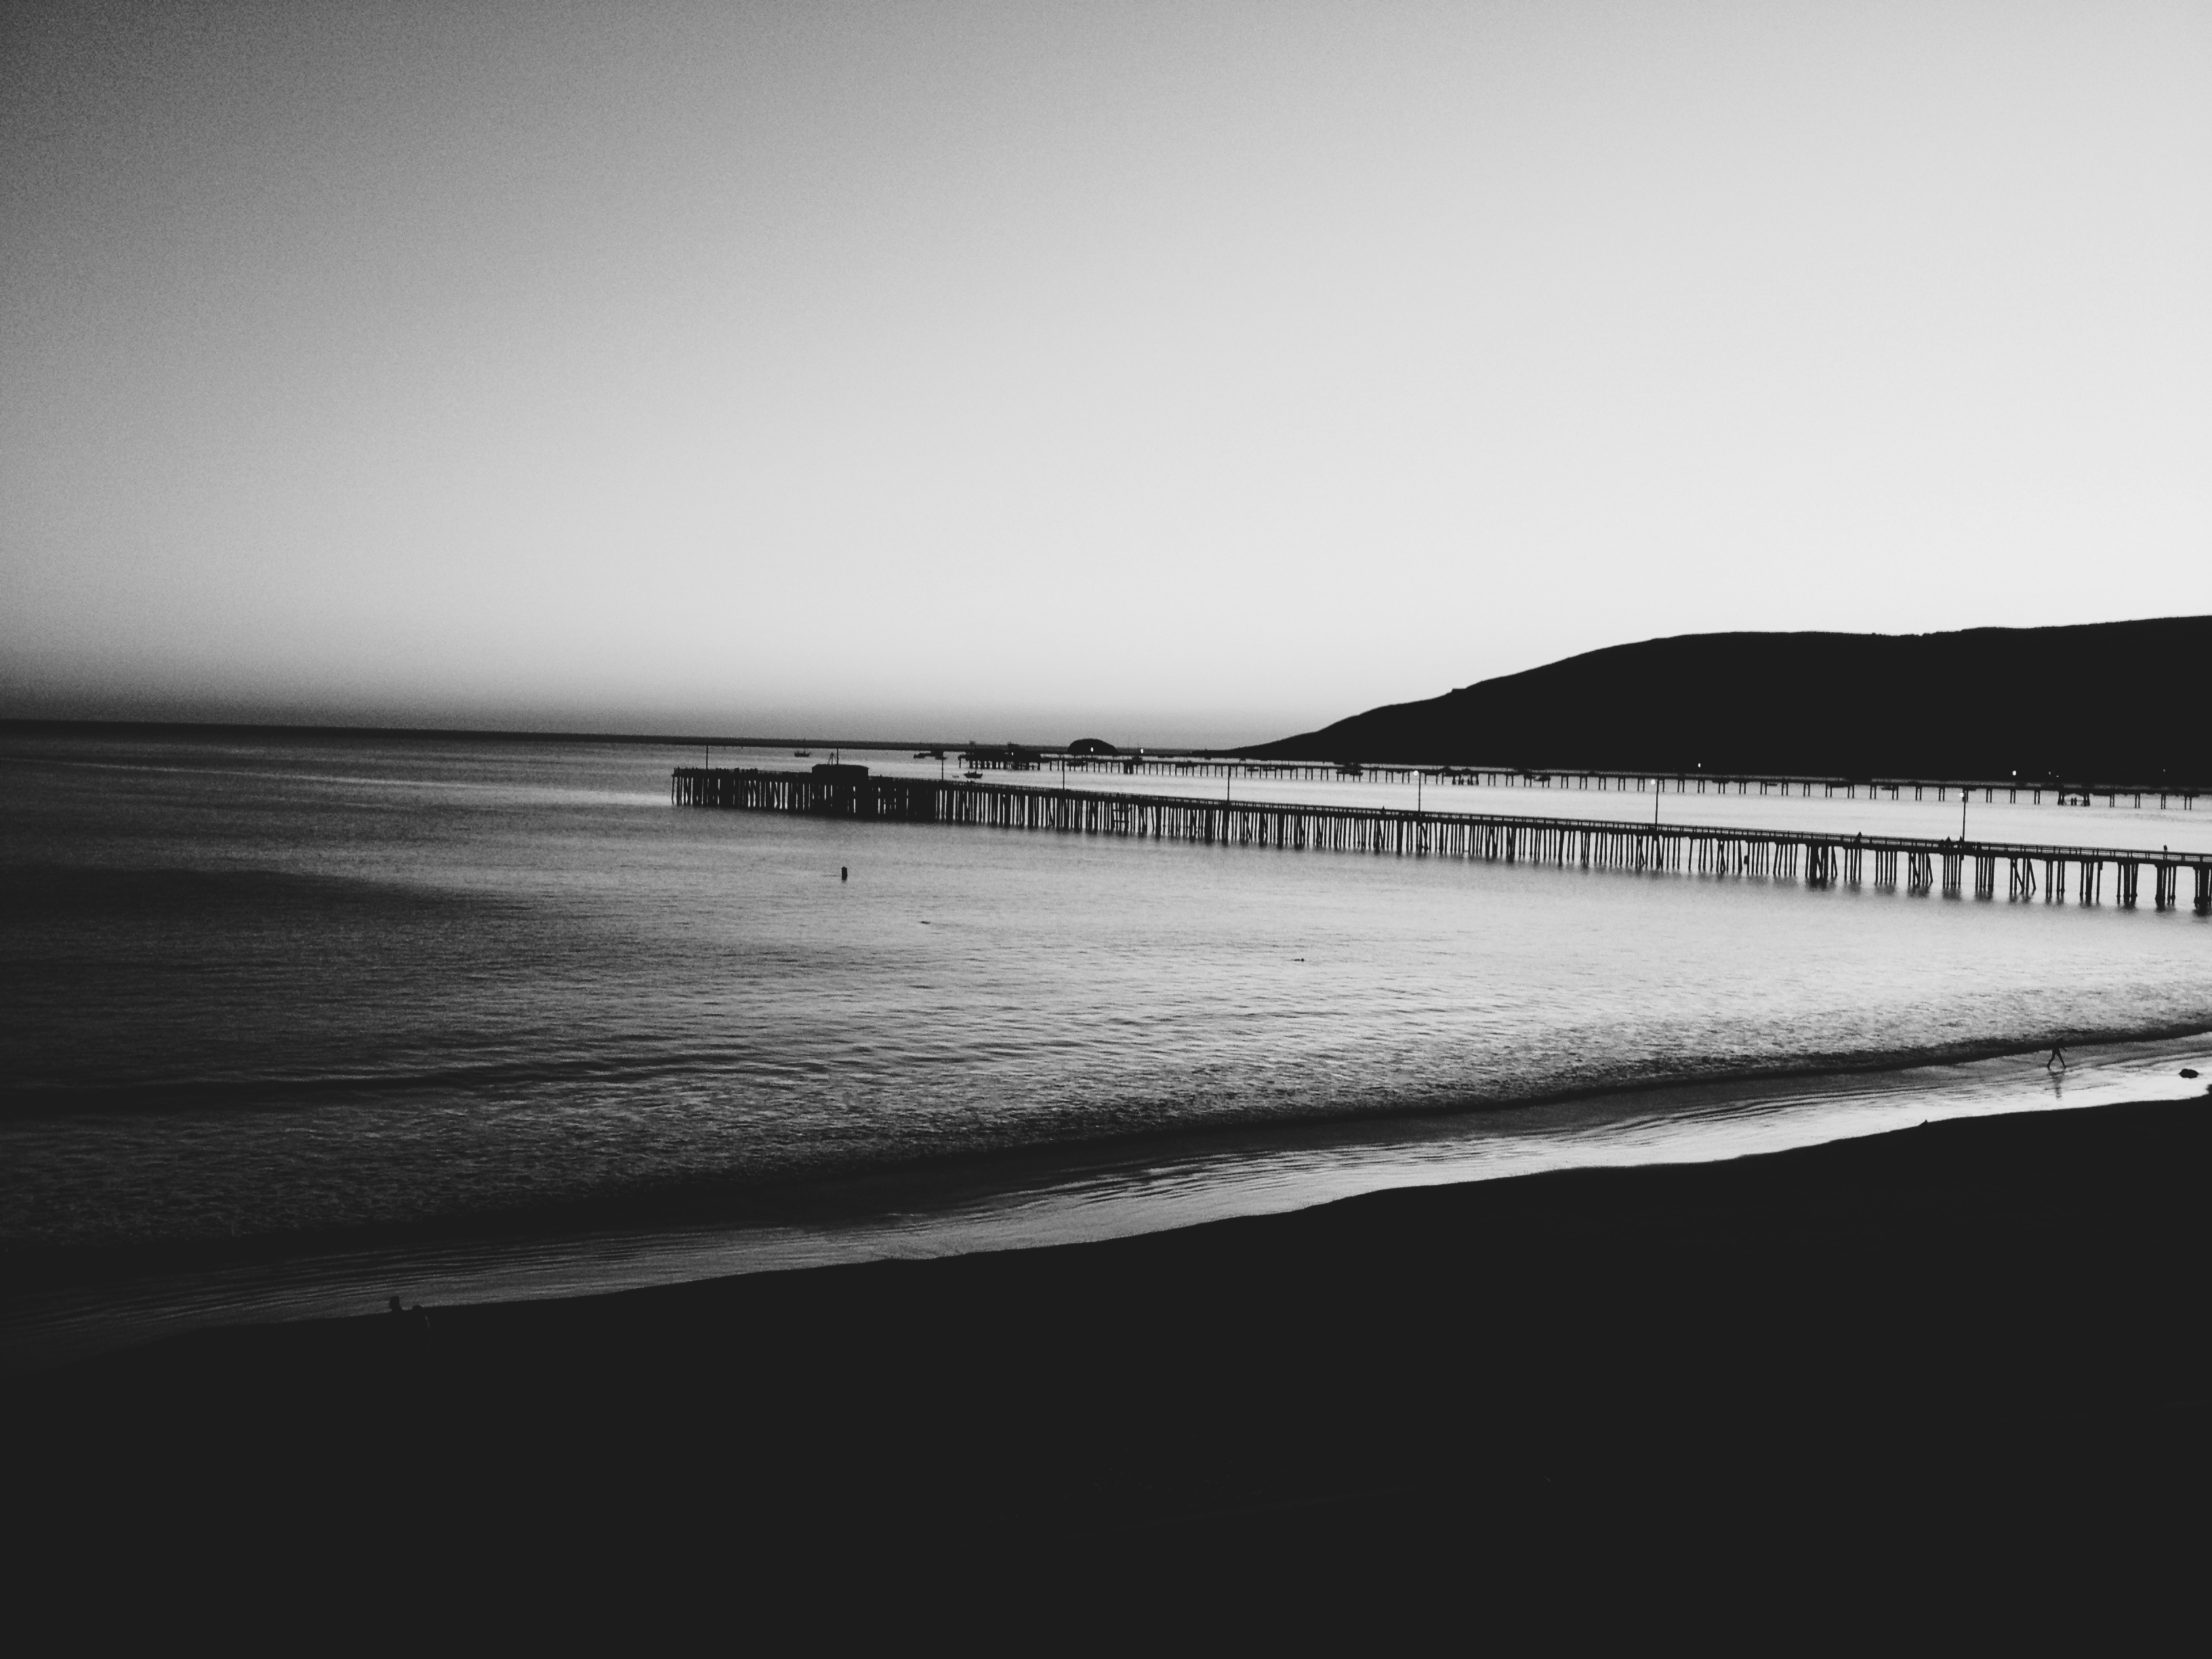 iphoneography__sunset_in_slo__black_and_white_by_eeumeyeelwhy-d5l2knn